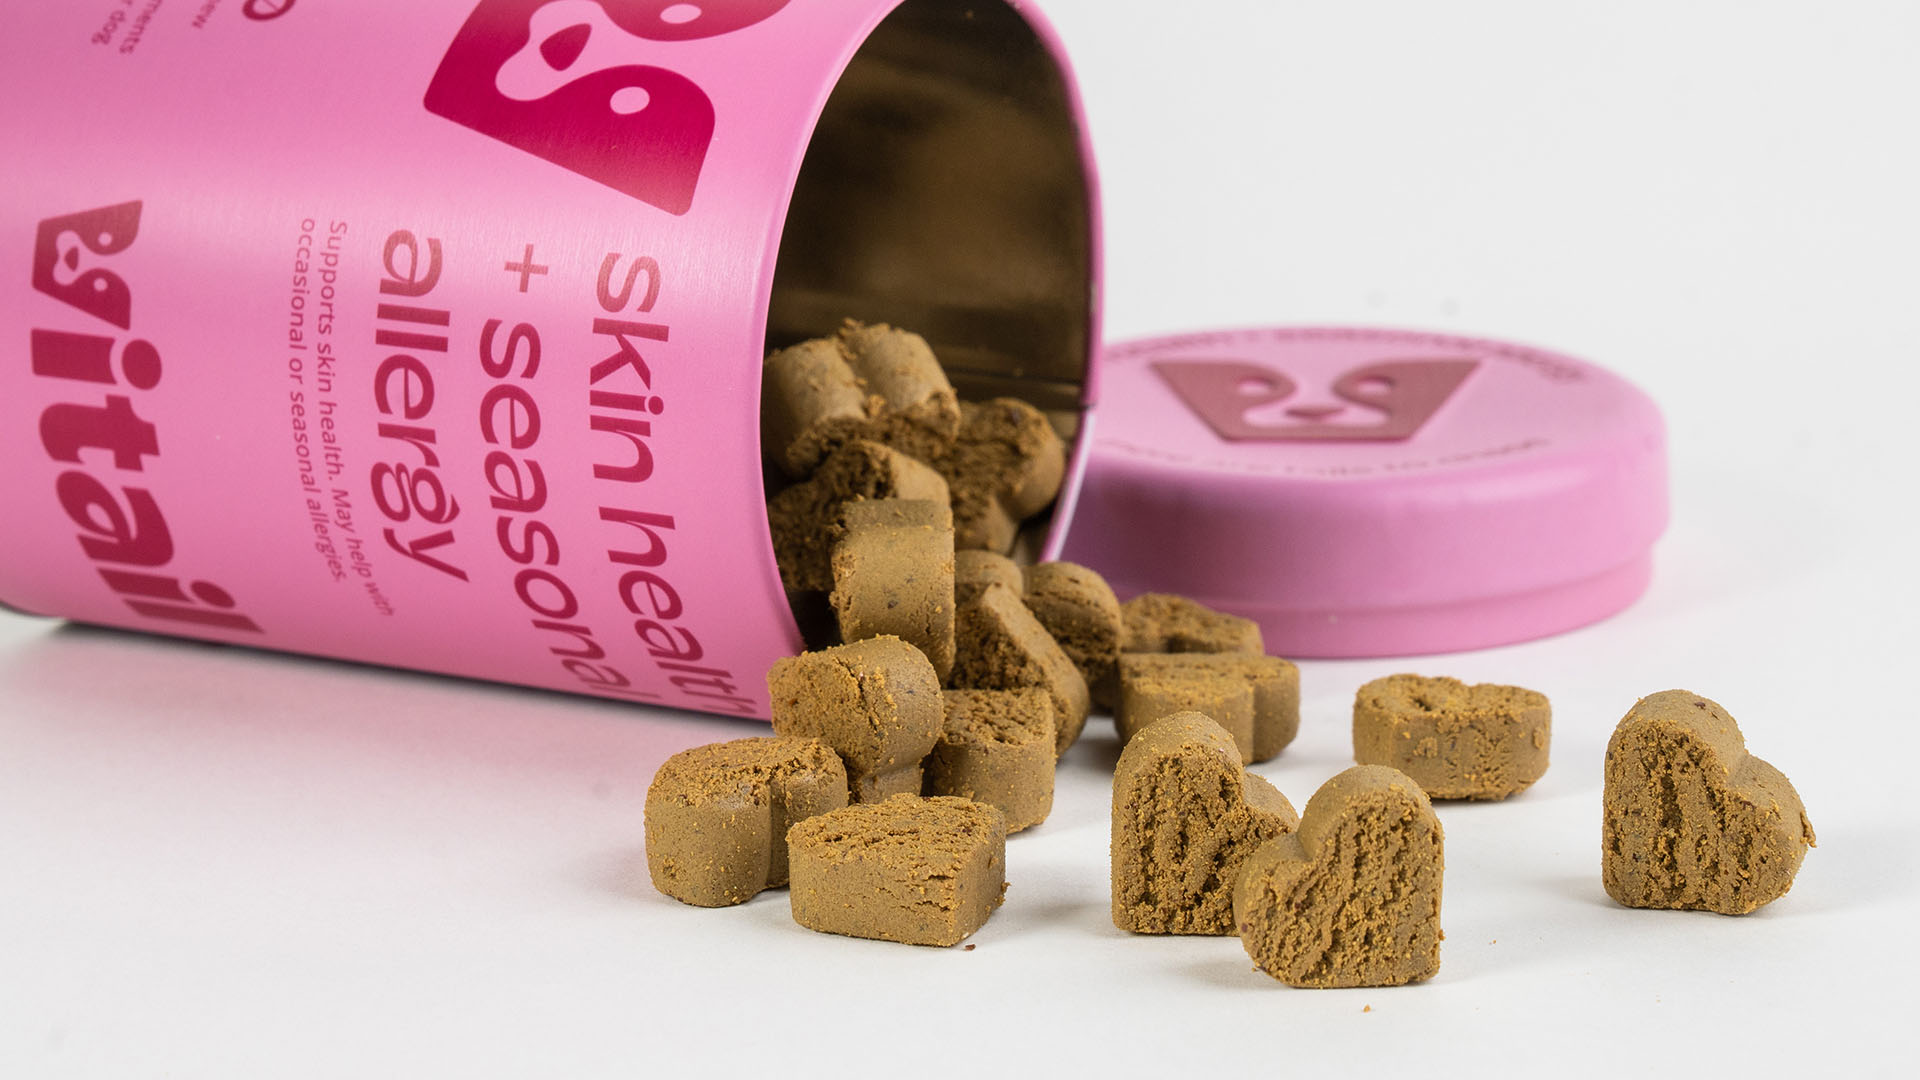 Vitail offers a range of supplements made with active ingredients, like amino acids, for dogs